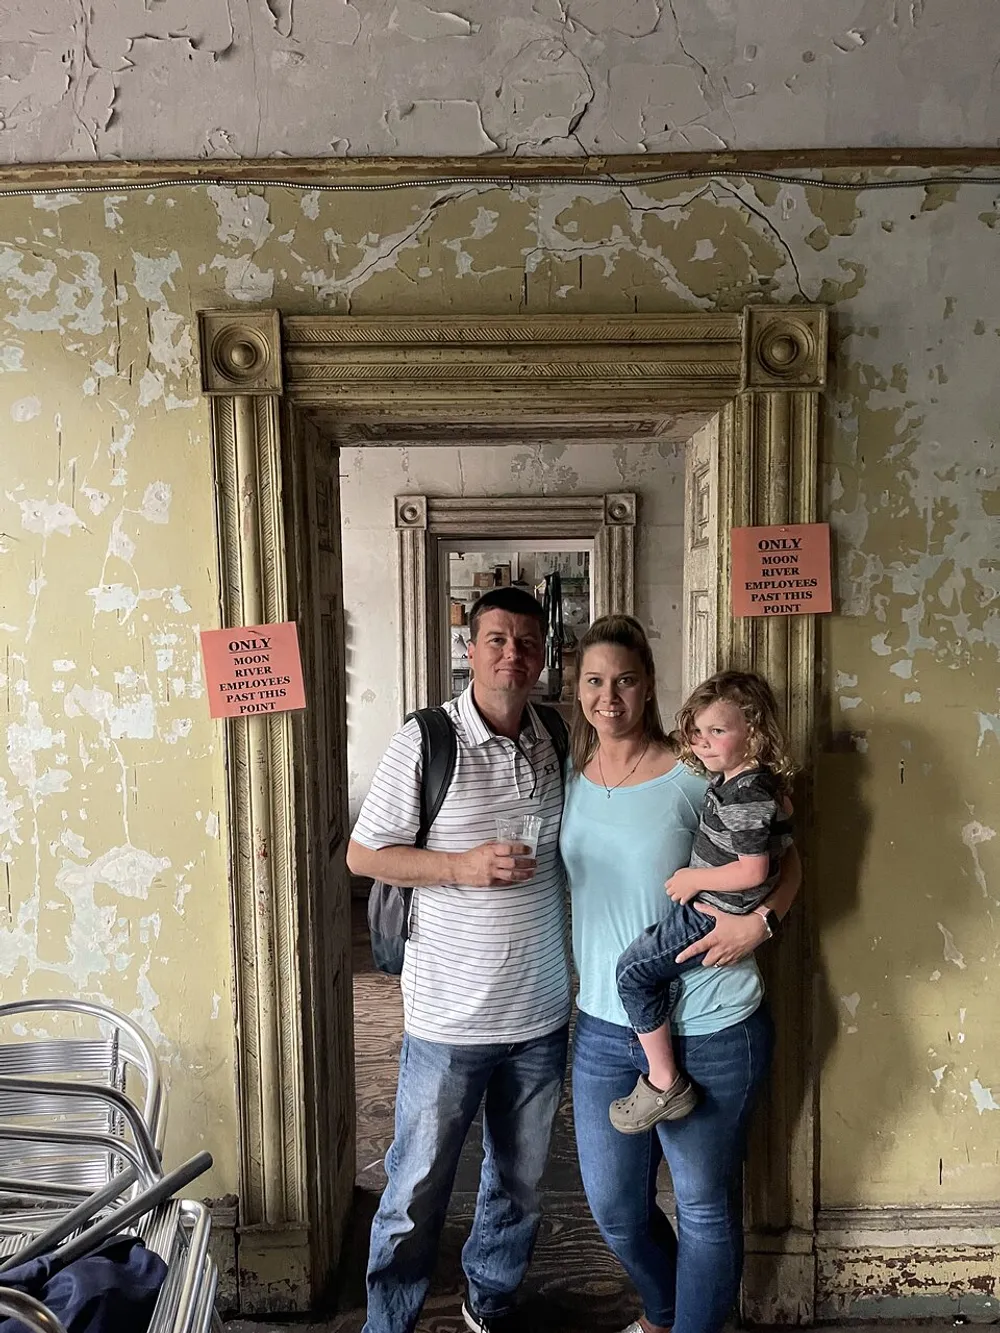 Three people are standing together smiling in front of a peeling wall inside a room with an ornate mirror and signs that say ONLY EMPLOYEES PAST THIS POINT